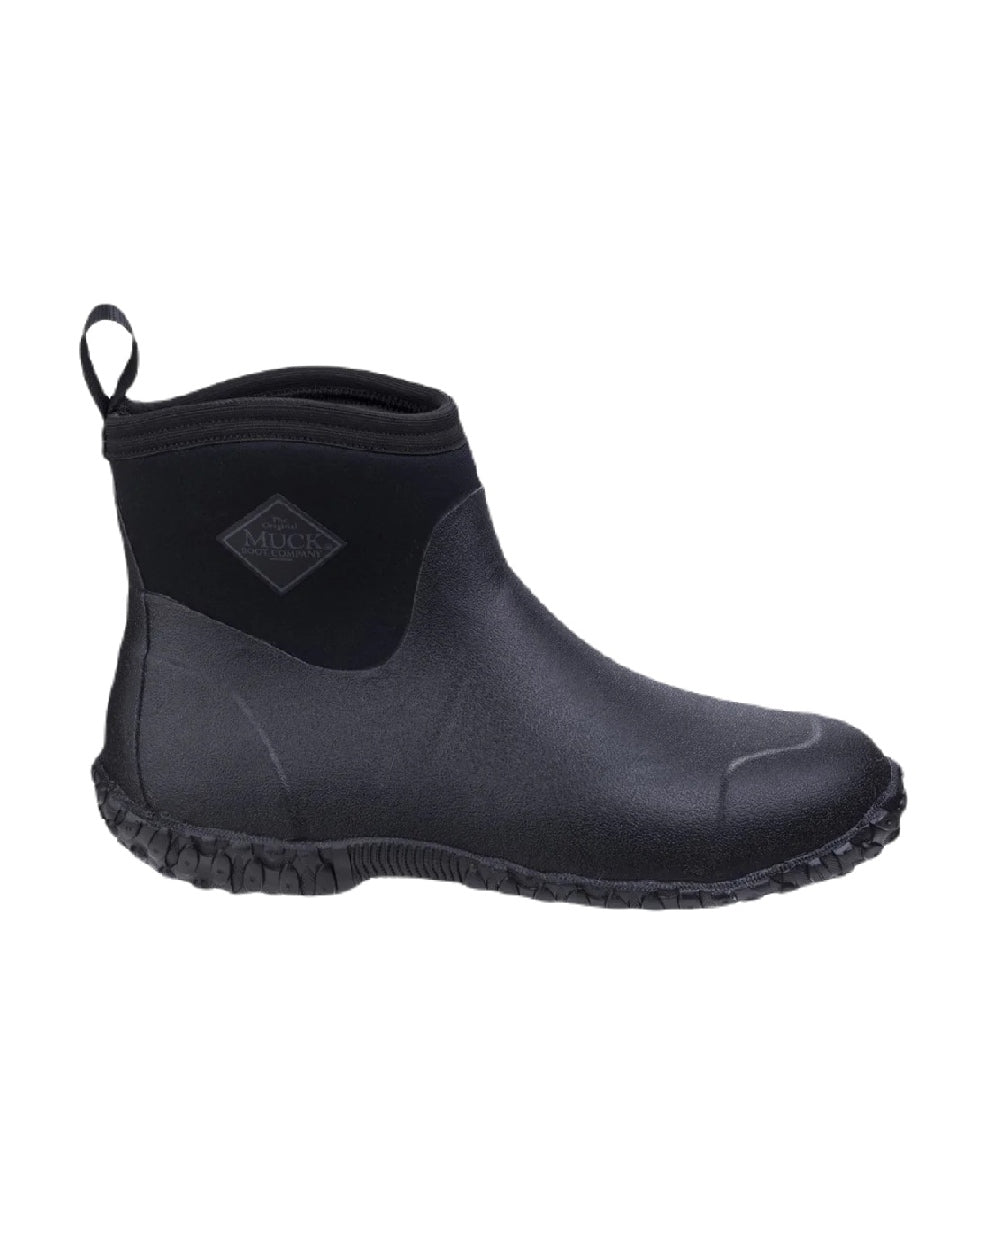 Muck Boots Mens RHS Muckster II Ankle Boots in Black 